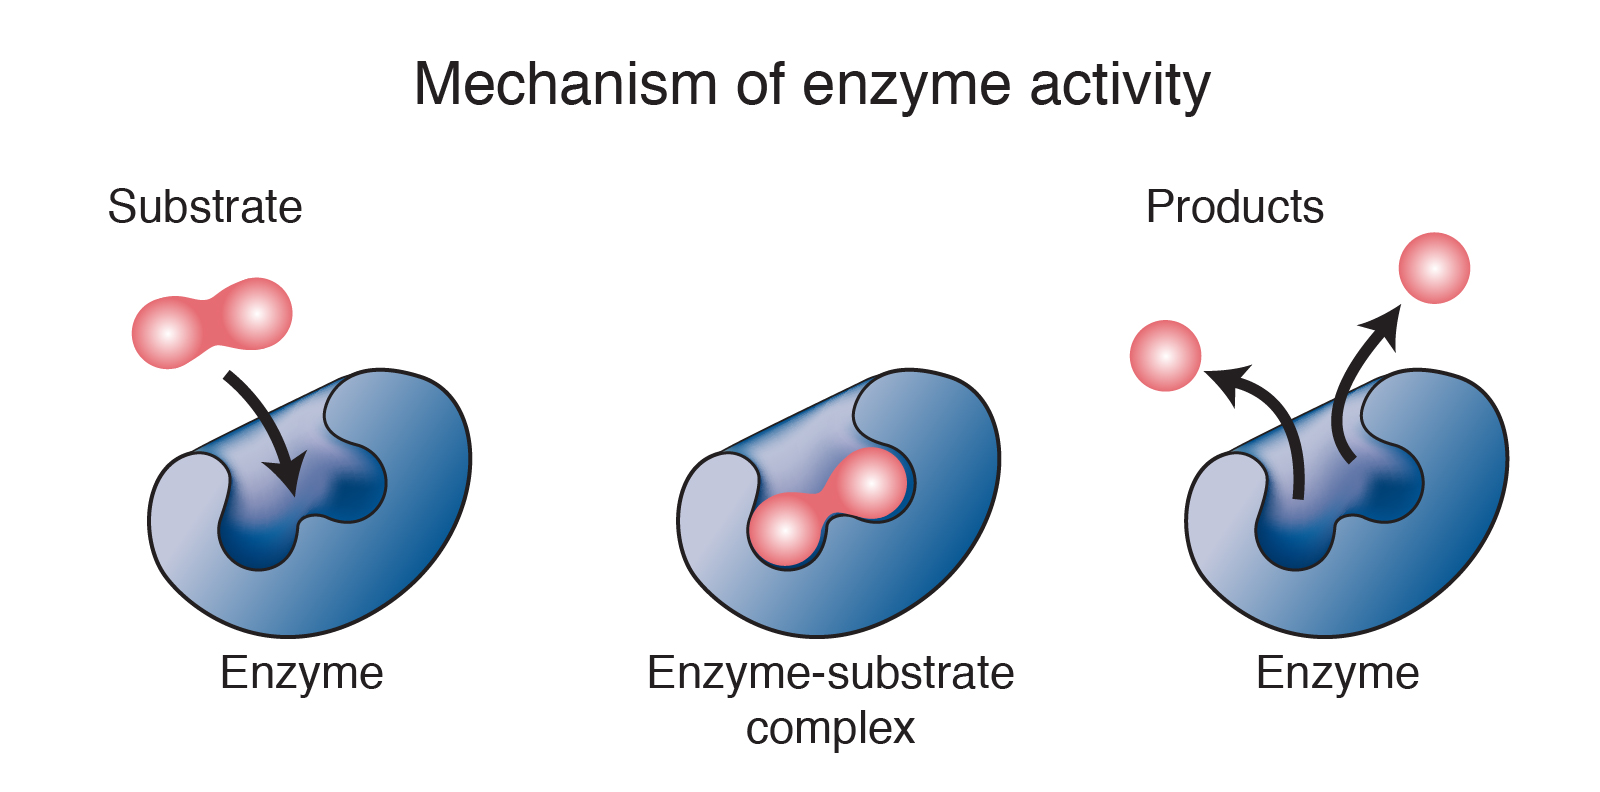 a researcher proposes a model to explain how enzyme substrate